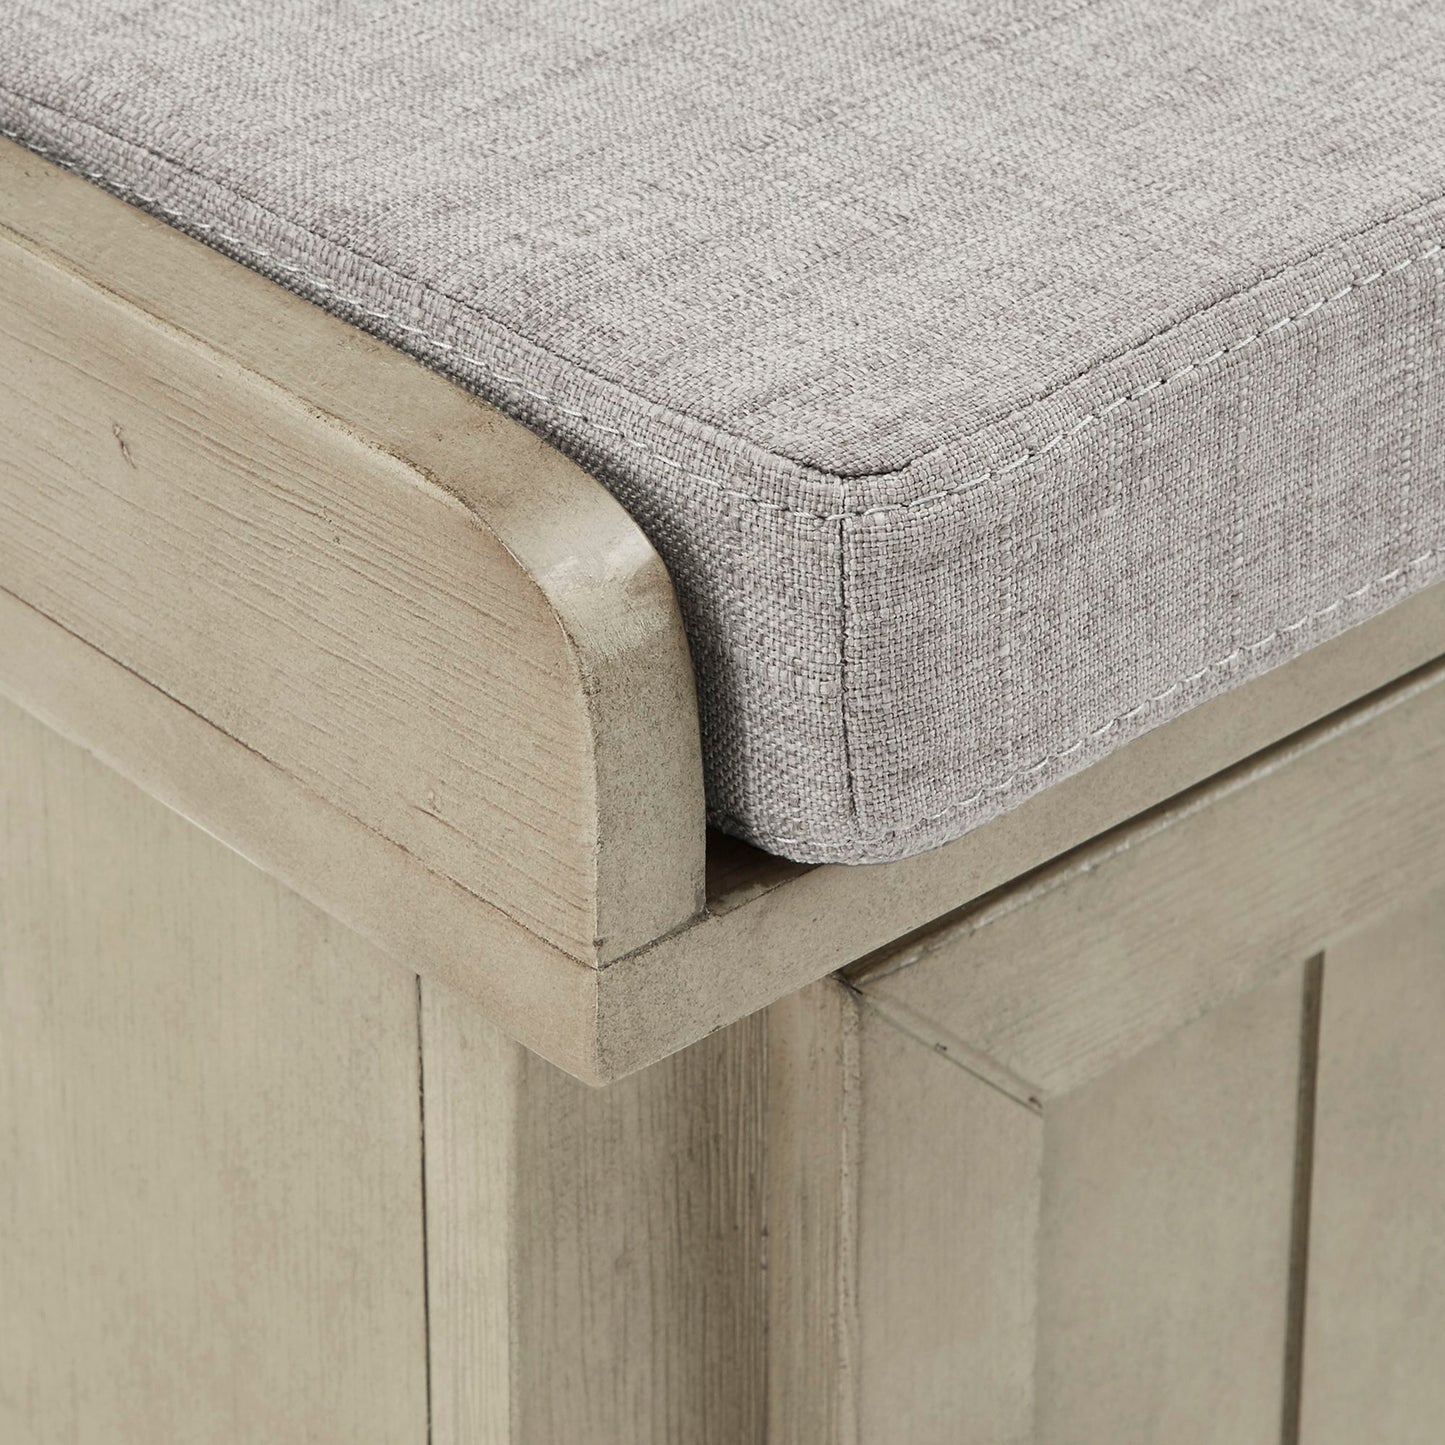 Storage Bench with Linen Seat Cushion - Antique Grey Finish